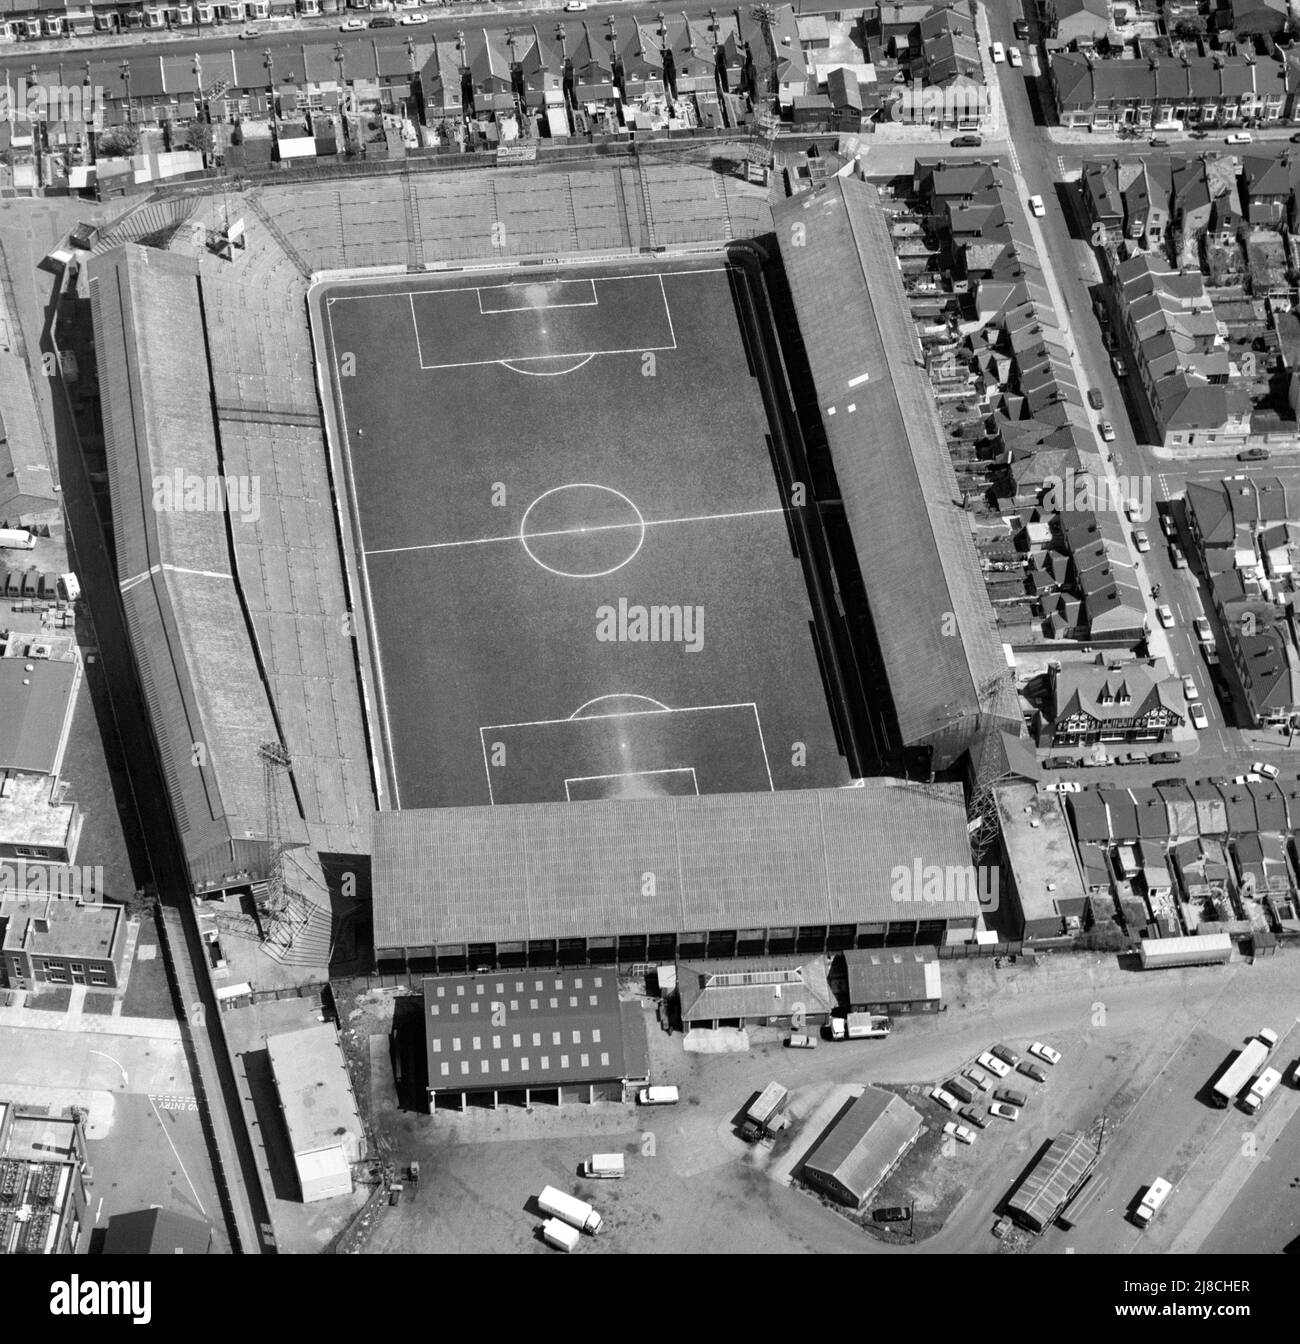 Aerial view of Fratton Park Football Ground, Fratton, Portsmouth, Hampshire, England, UK - photograph taken on 13th May 1985 Stock Photo